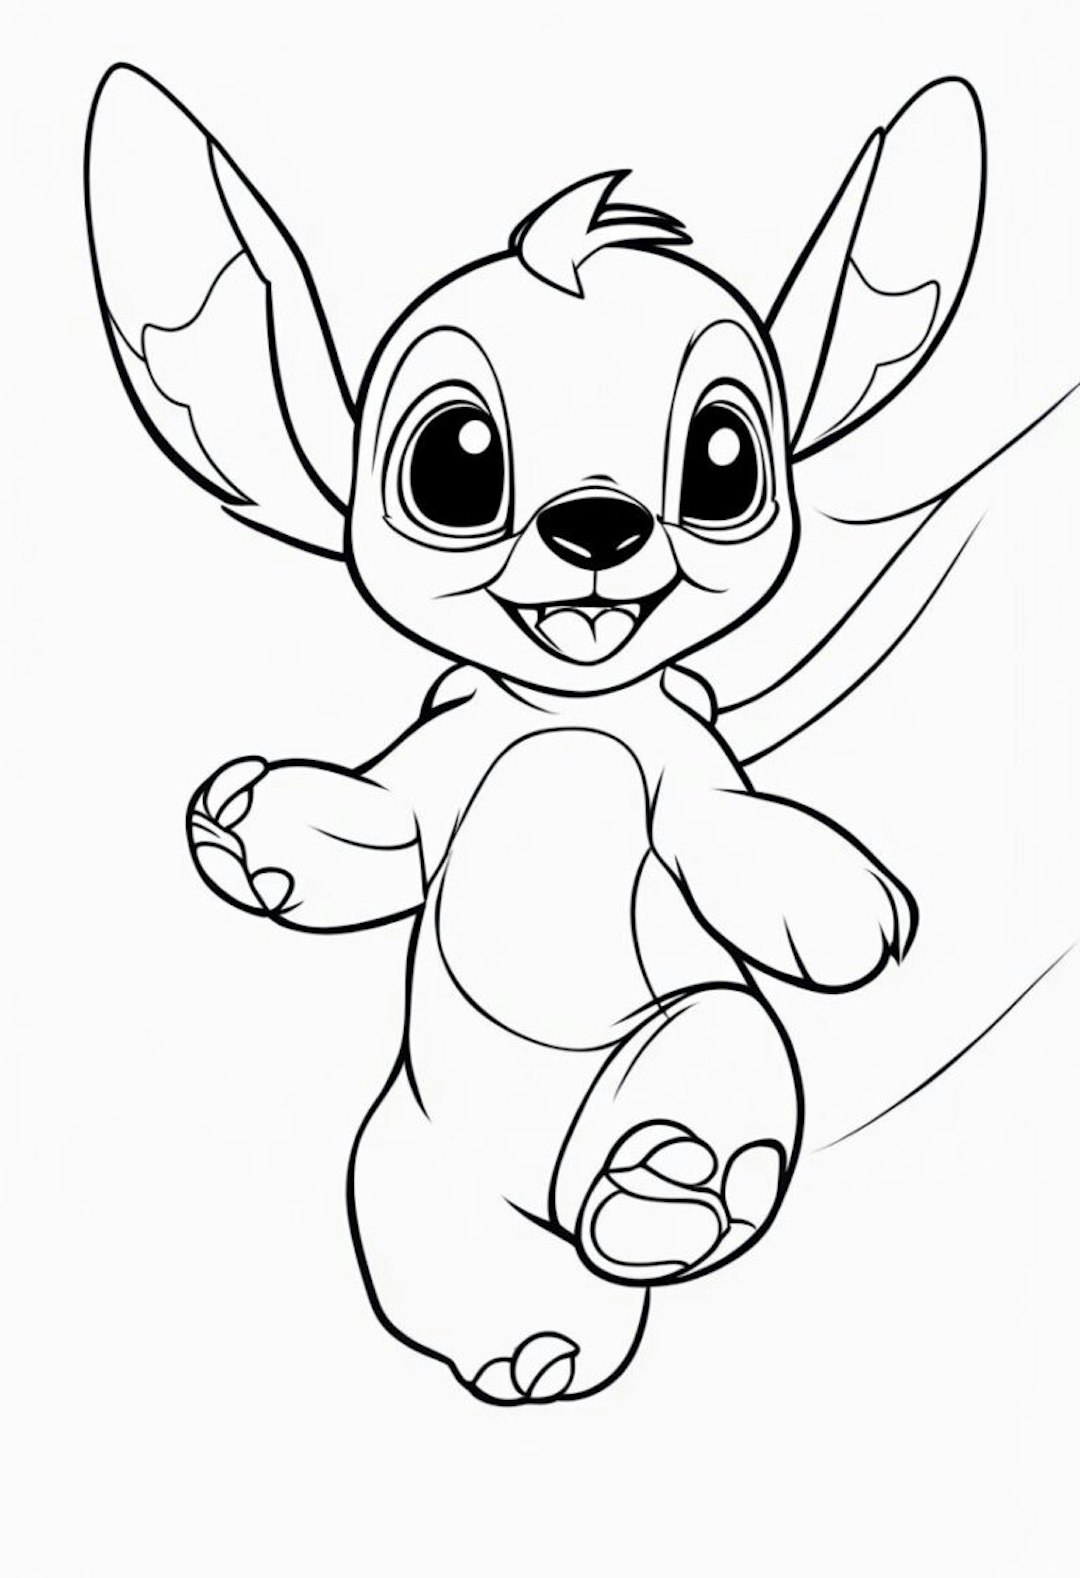 Stitch’s Adventure Fun Coloring Page coloring pages